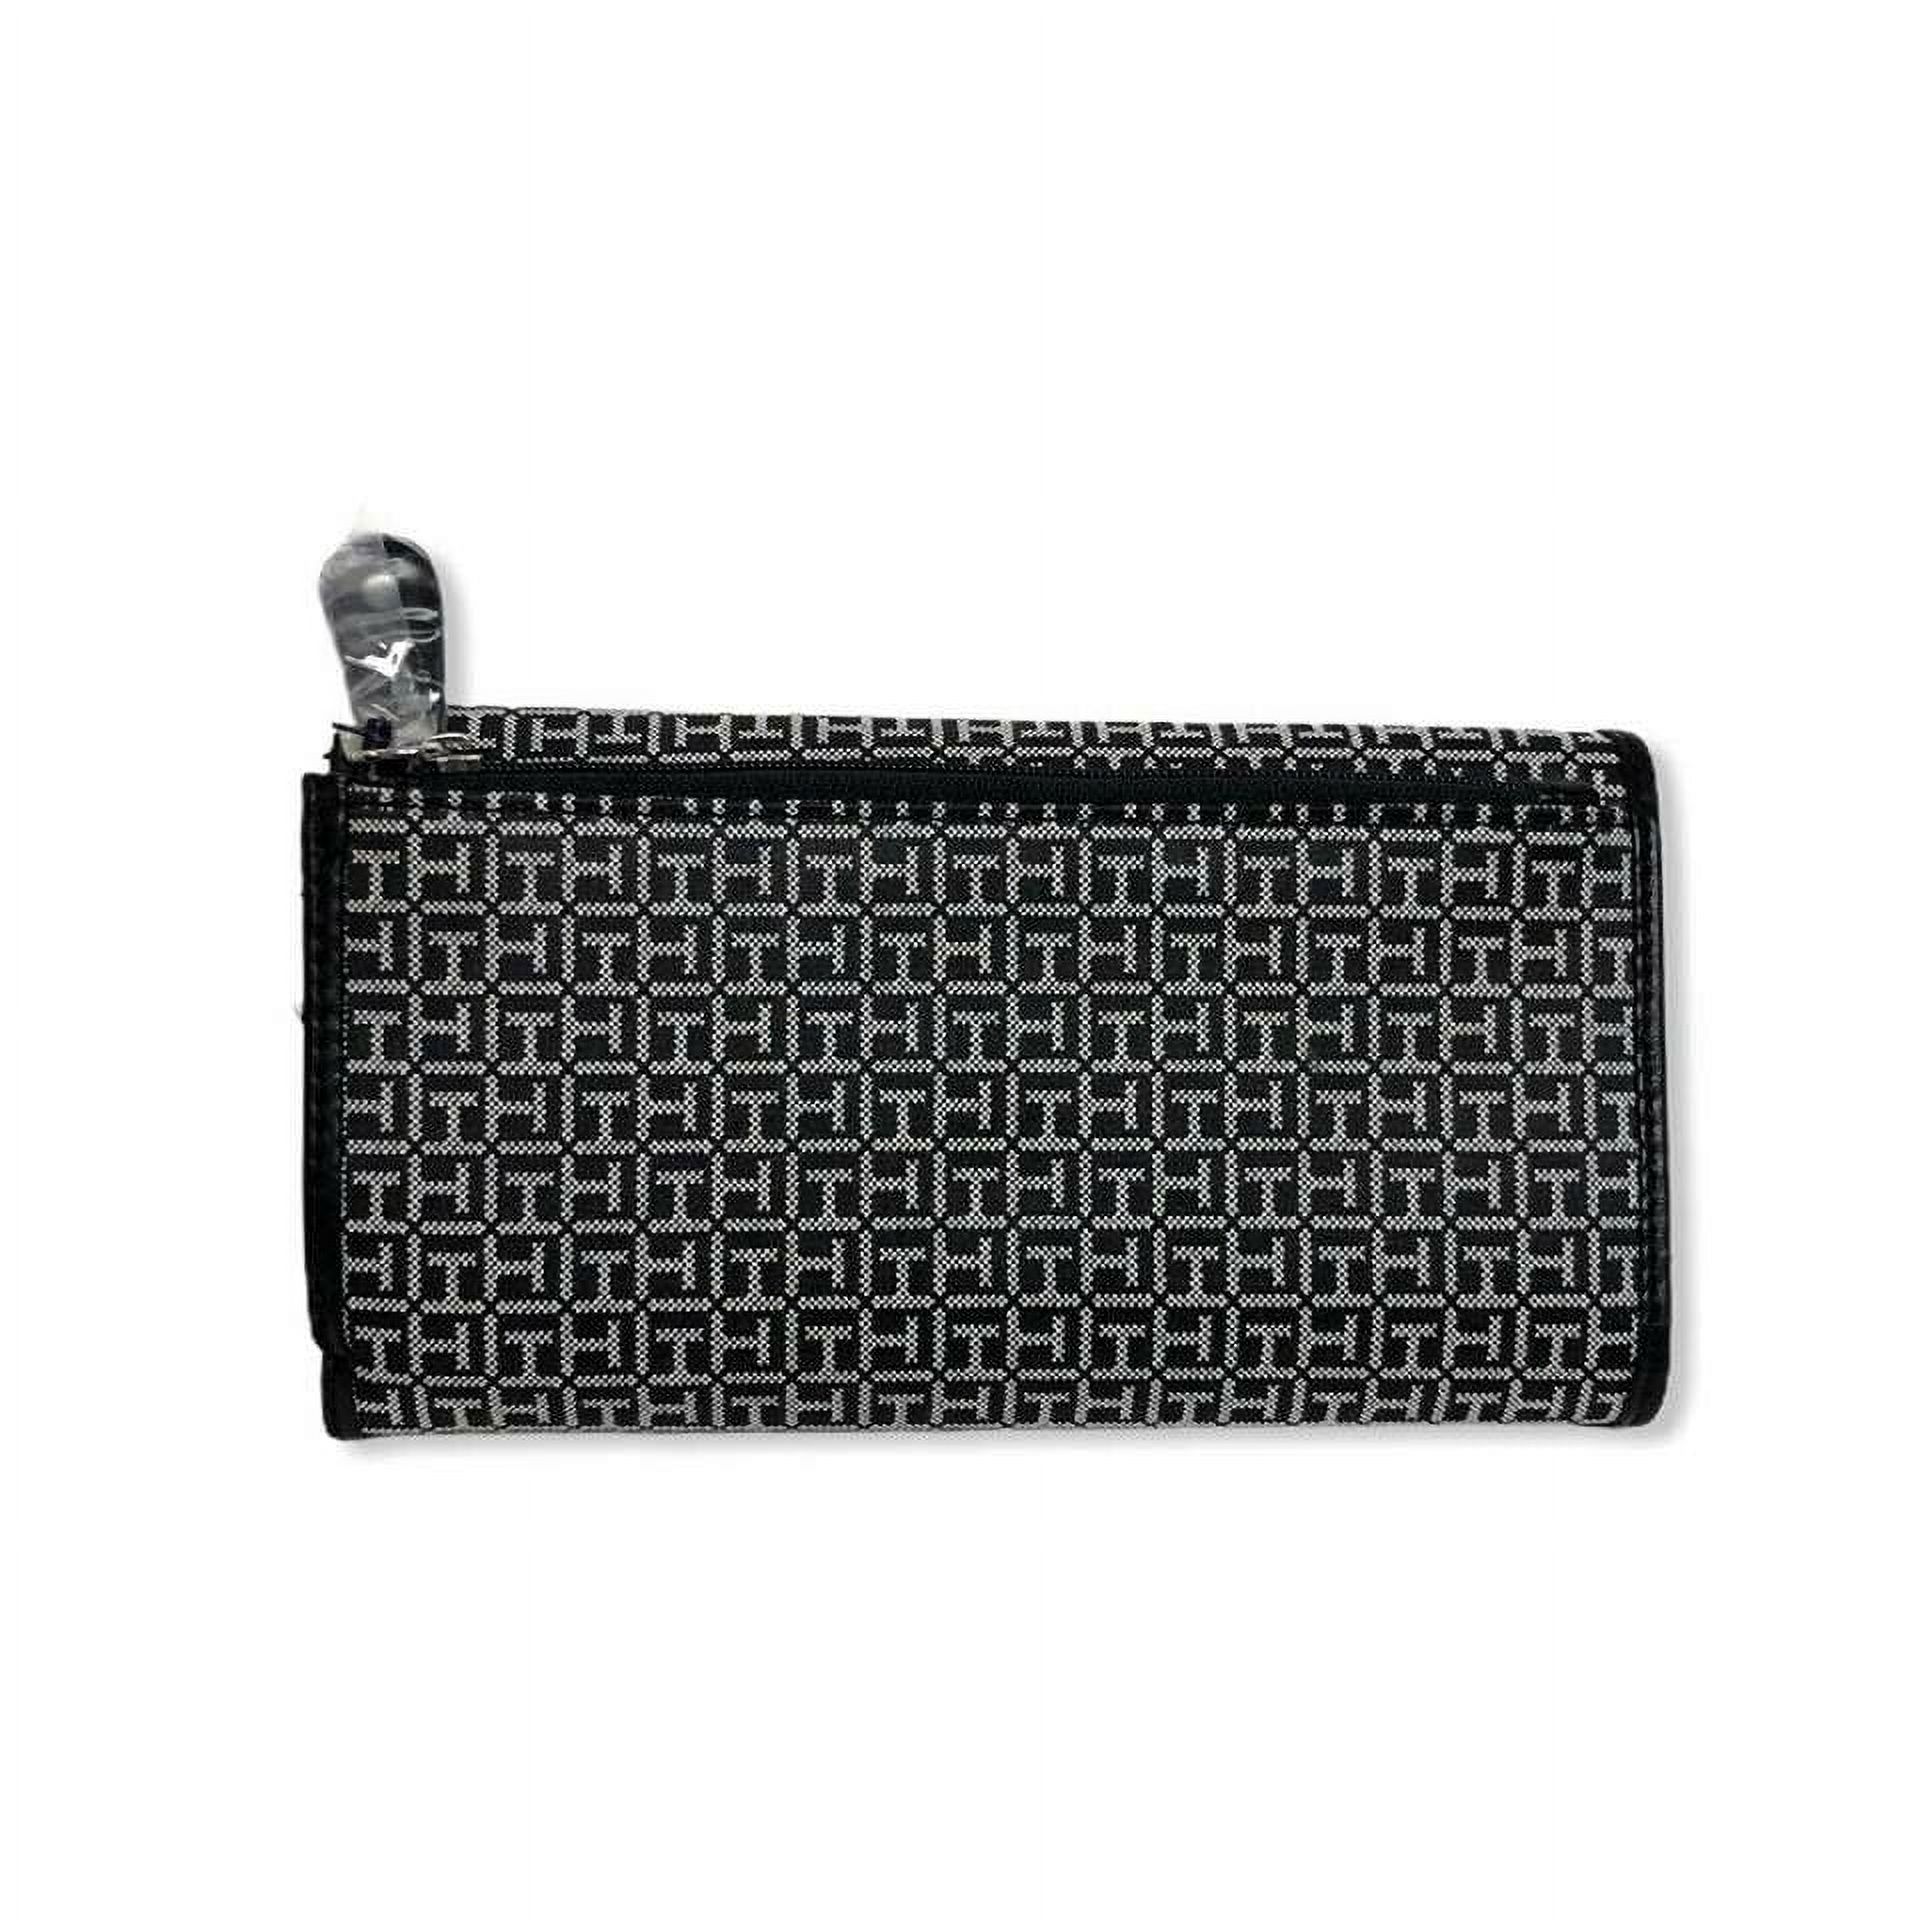 Tommy Hilfiger Womens Wallet Snap Closure Trifold Casual Checkbook - Black TH Monogram - image 2 of 3